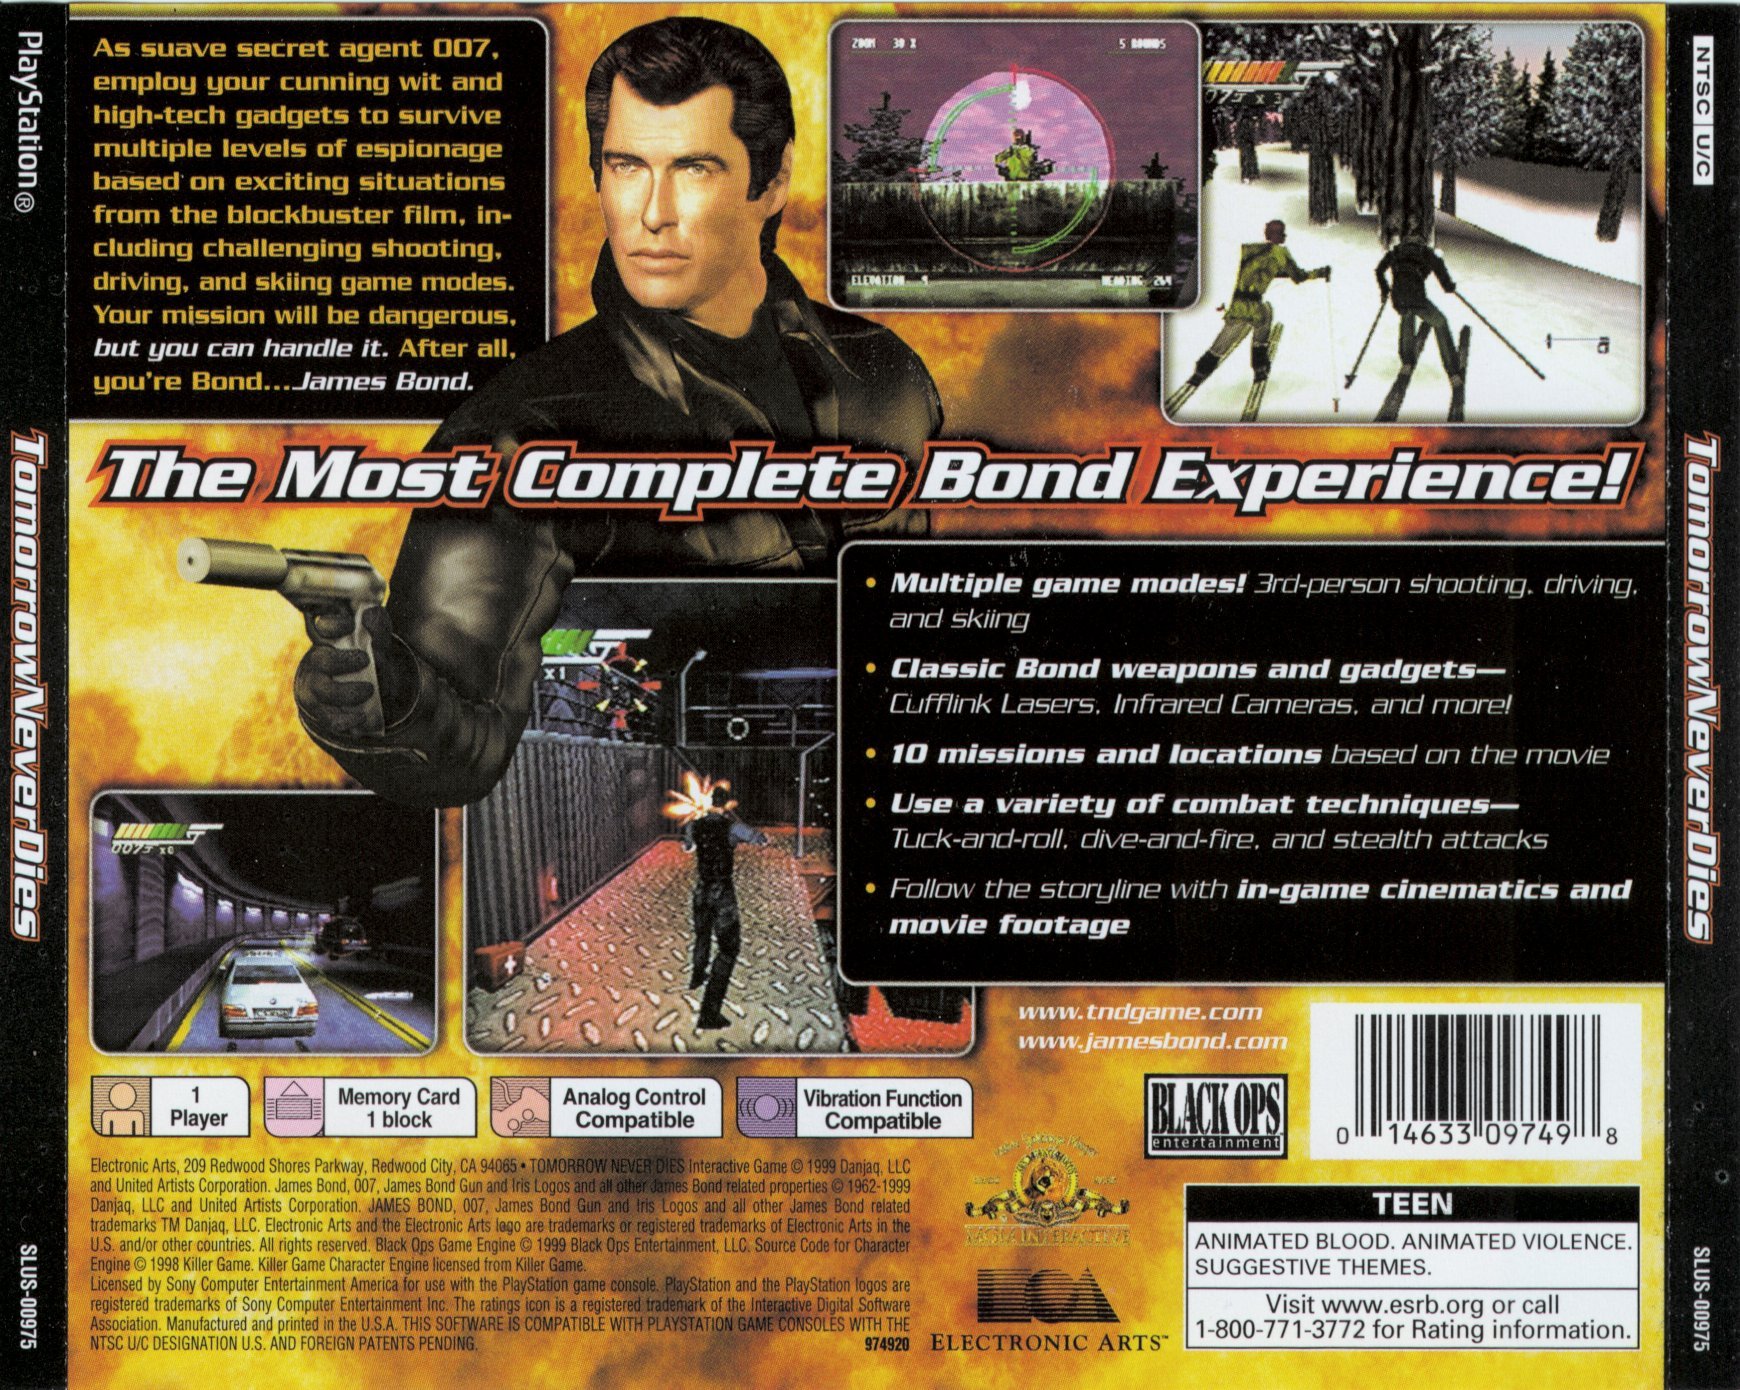 007 - Tomorrow never dies PSX cover